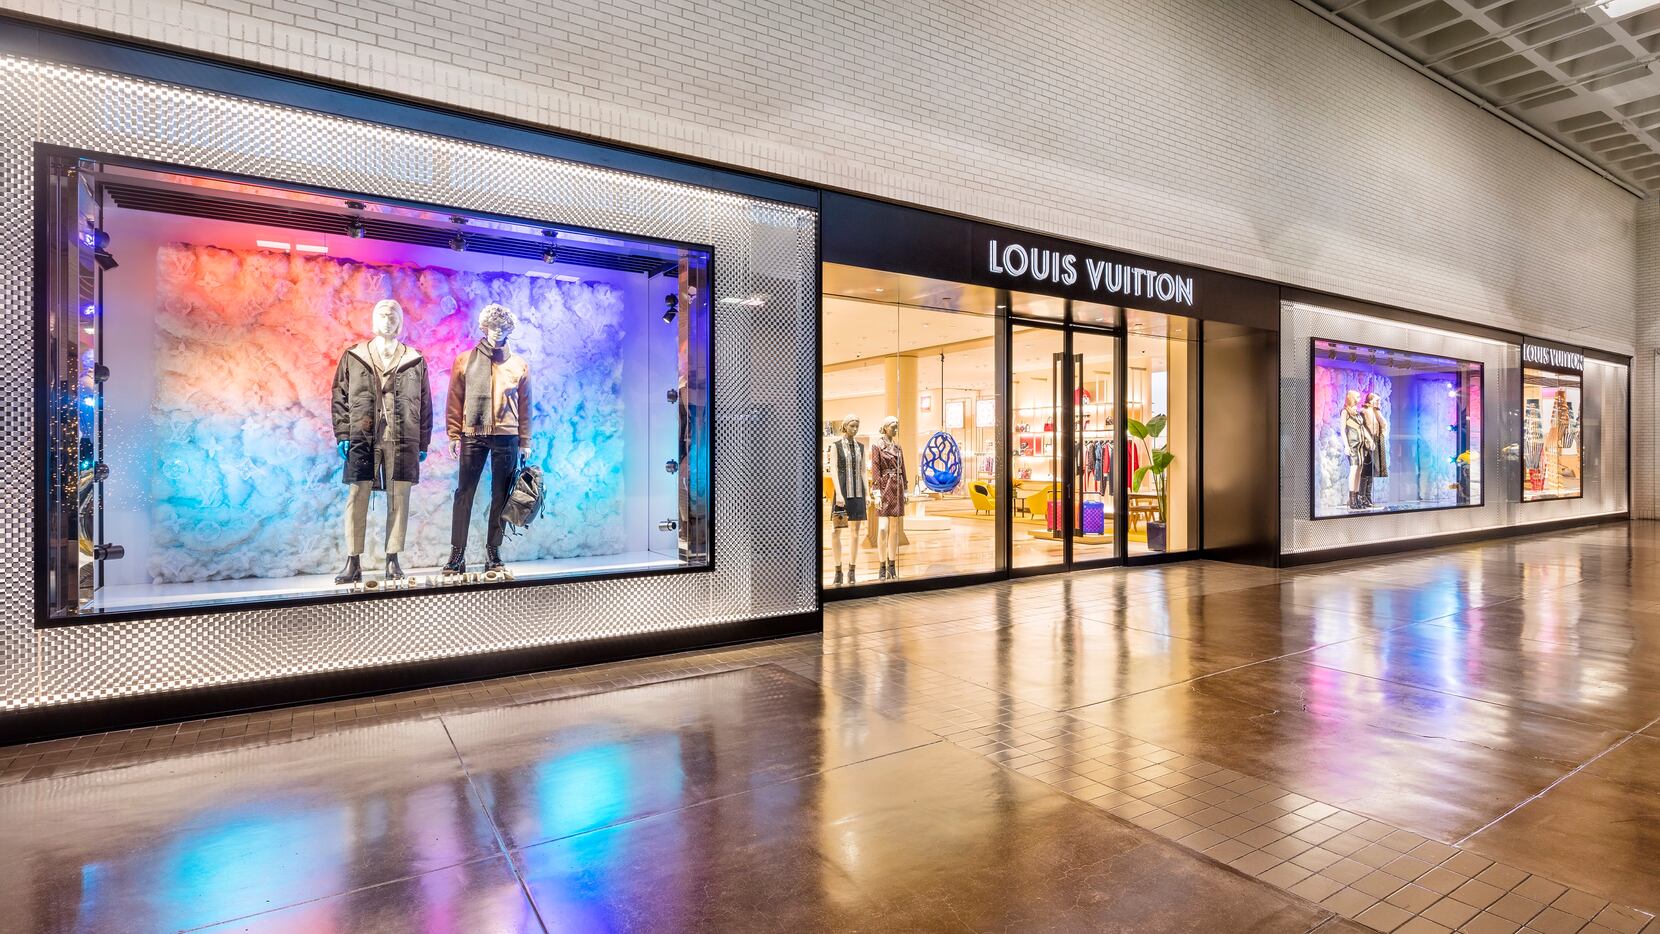 HOW TO GET FREE STUFF AT LOUIS VUITTON (and other luxury stores) 